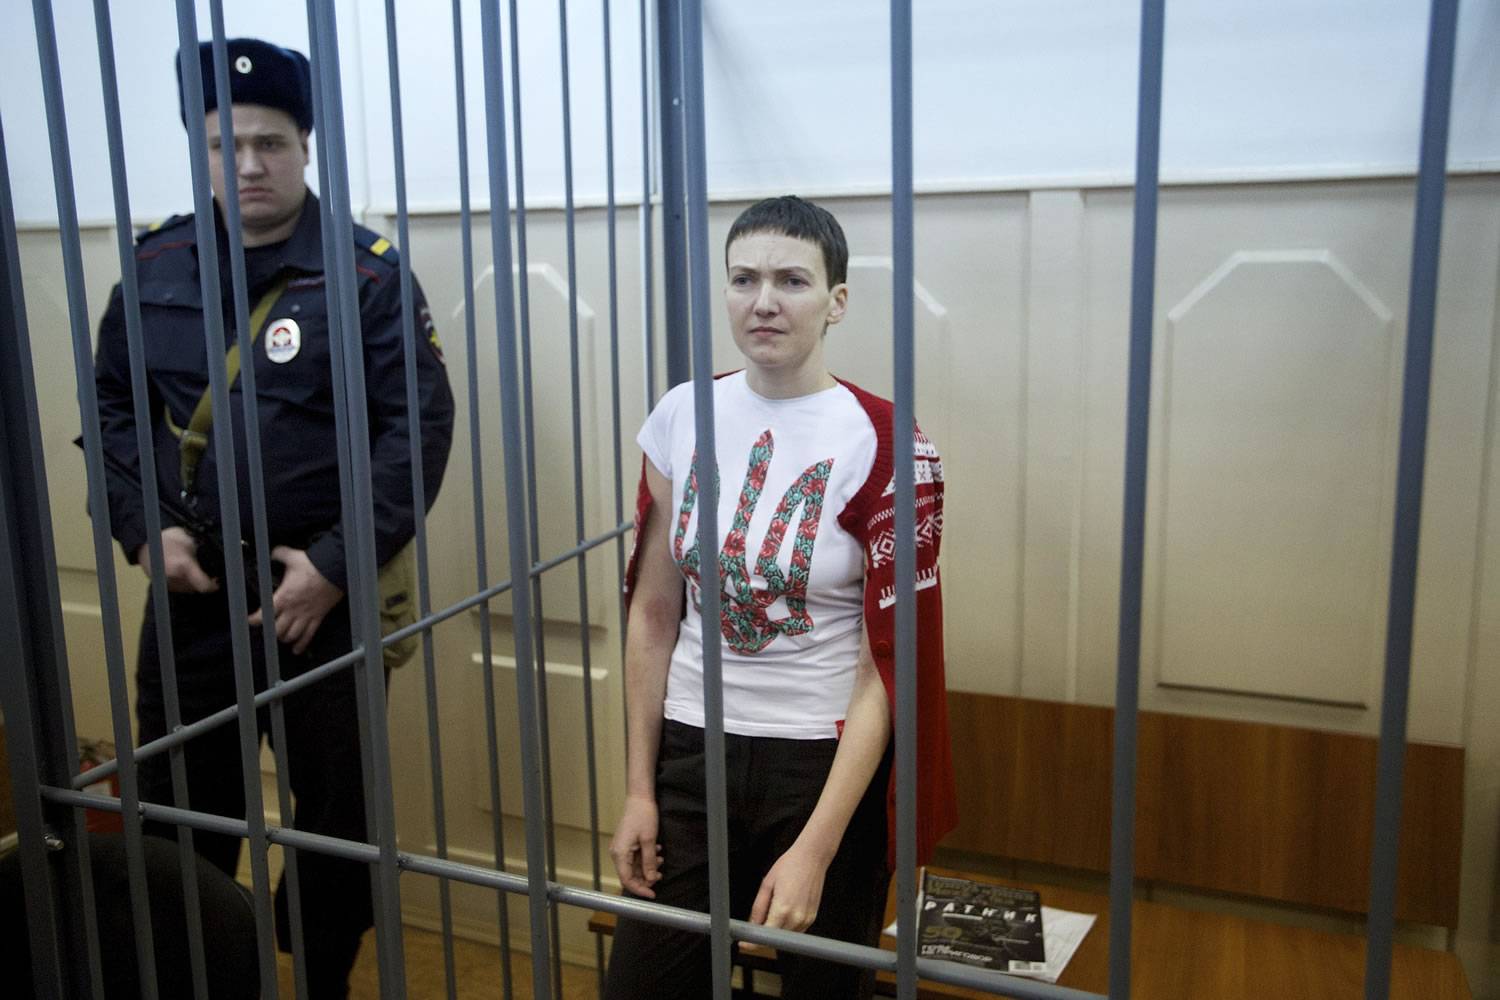 Jailed Ukrainian military officer Nadezhda Savchenko stands Tuesday in a courtroom in Moscow.